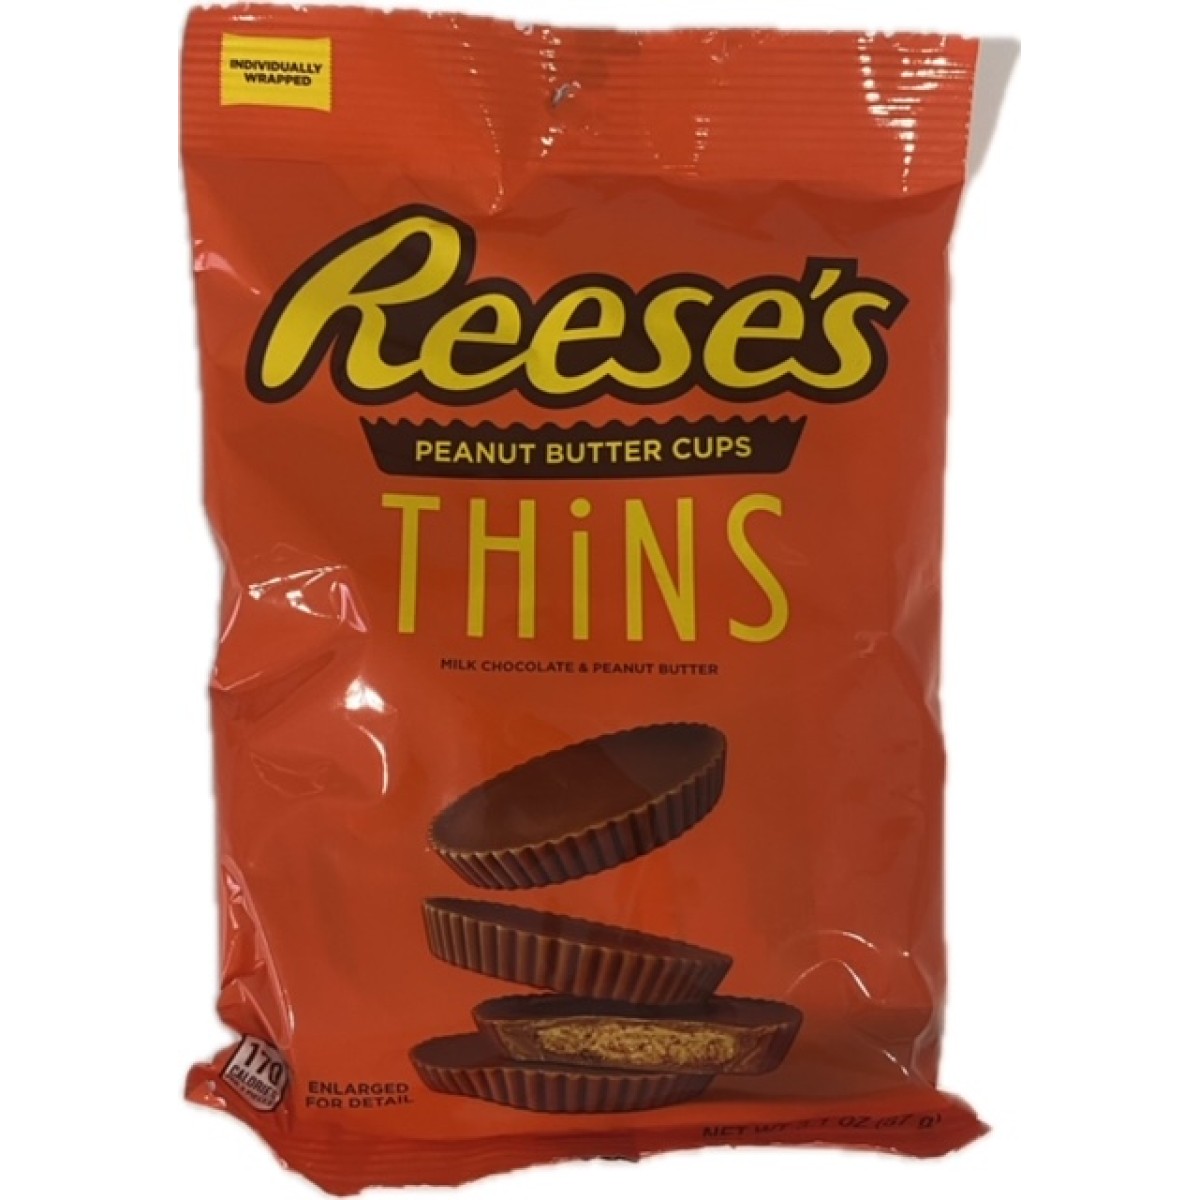 Reese's thins